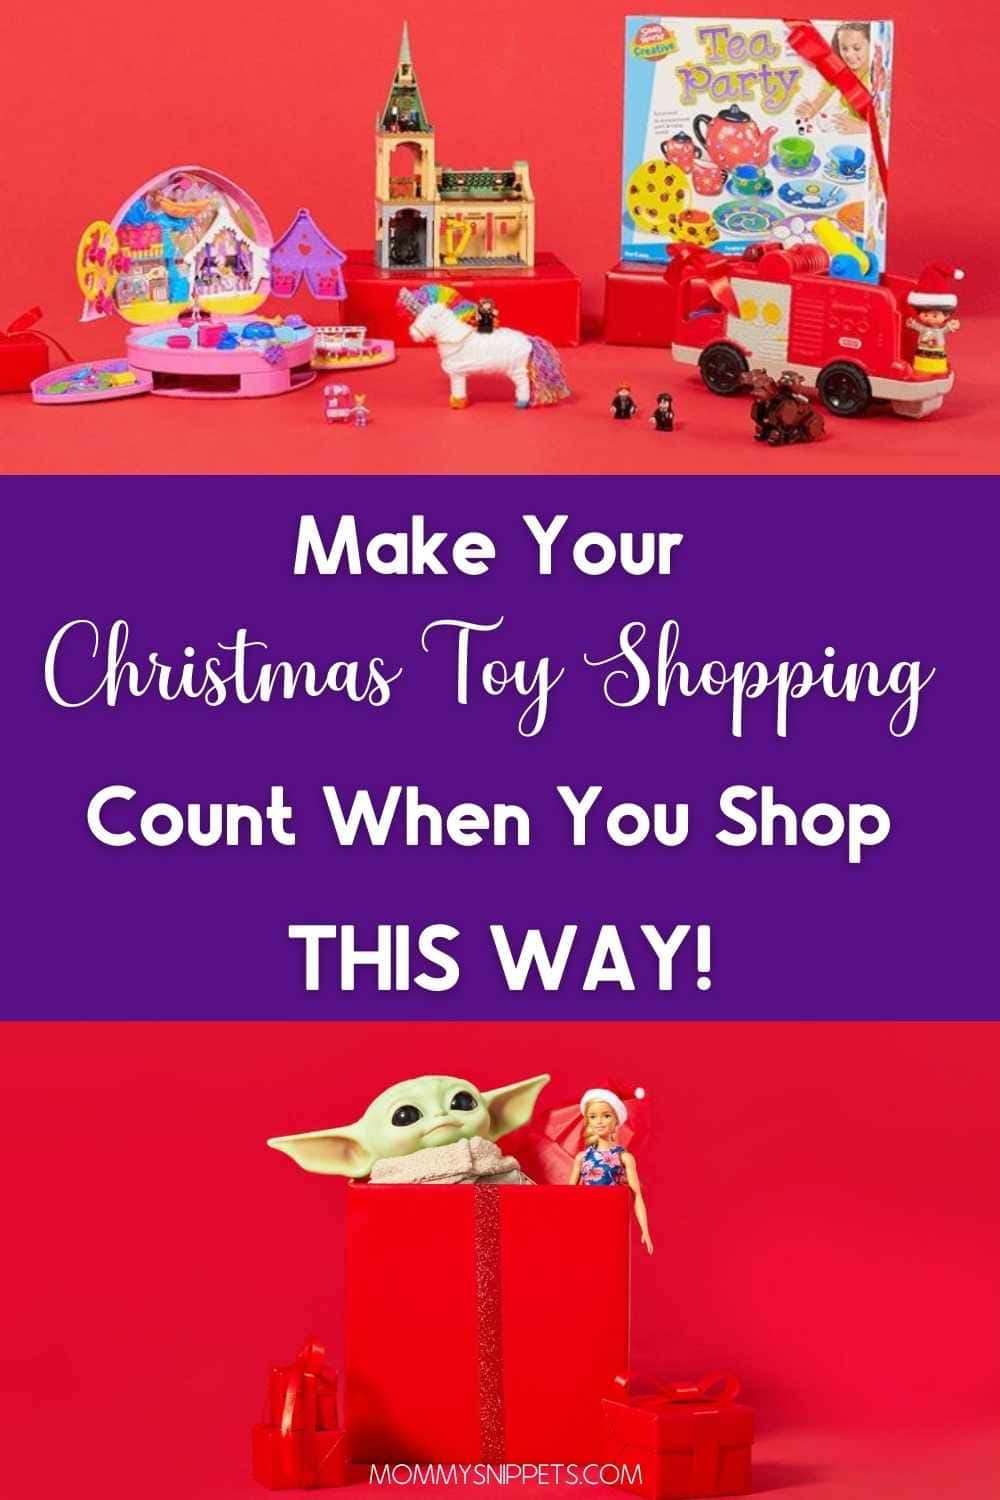 Make Your Christmas Toy Shopping Count When You Shop This Way!